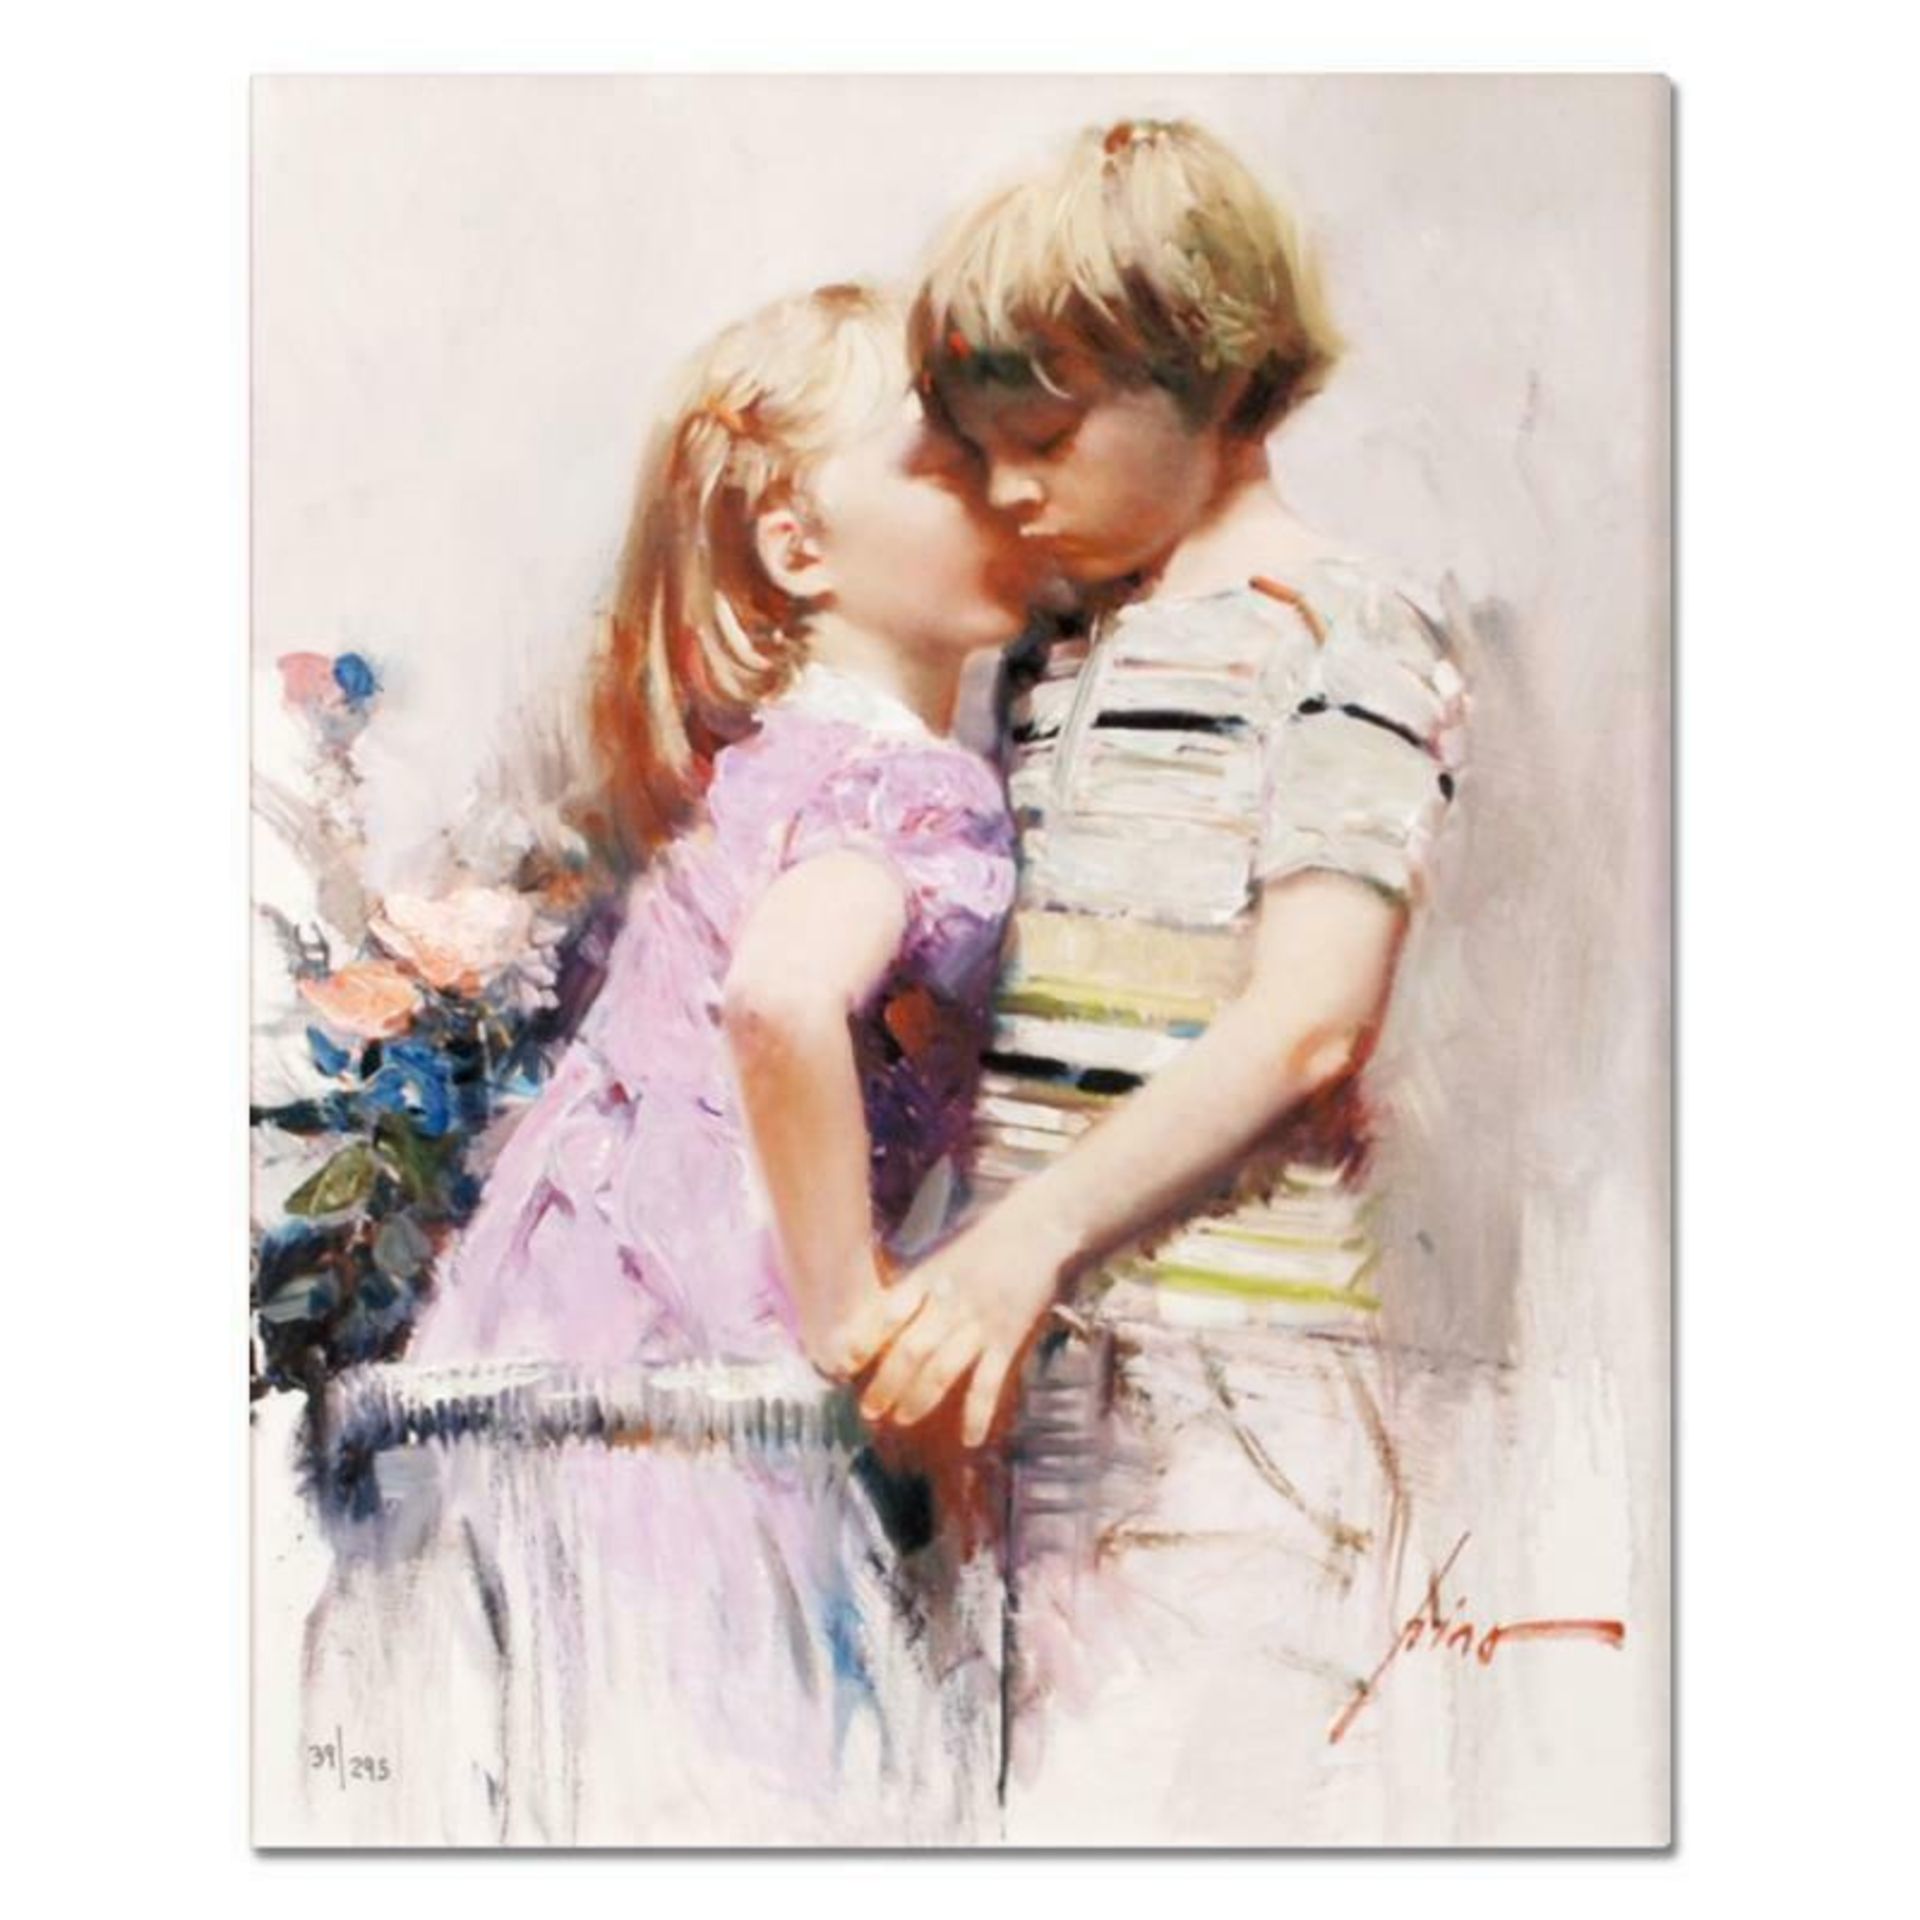 Pino (1939-2010), "The Kiss" Artist Embellished Limited Edition on Canvas, Numbe